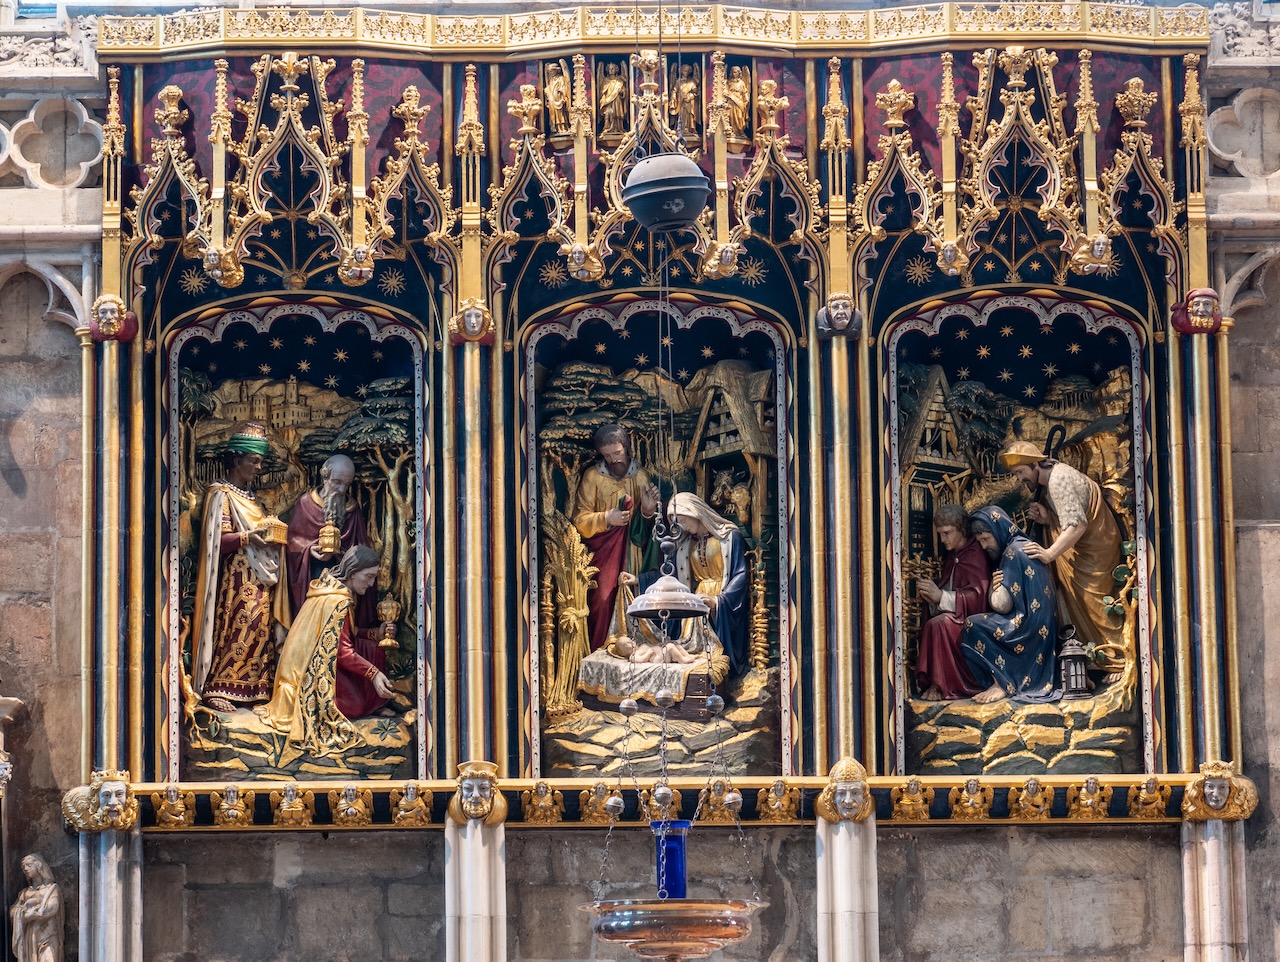 Lady Chapel, reredos (1905) showing a Nativity scene with the Magi (left) and shepherds (right)